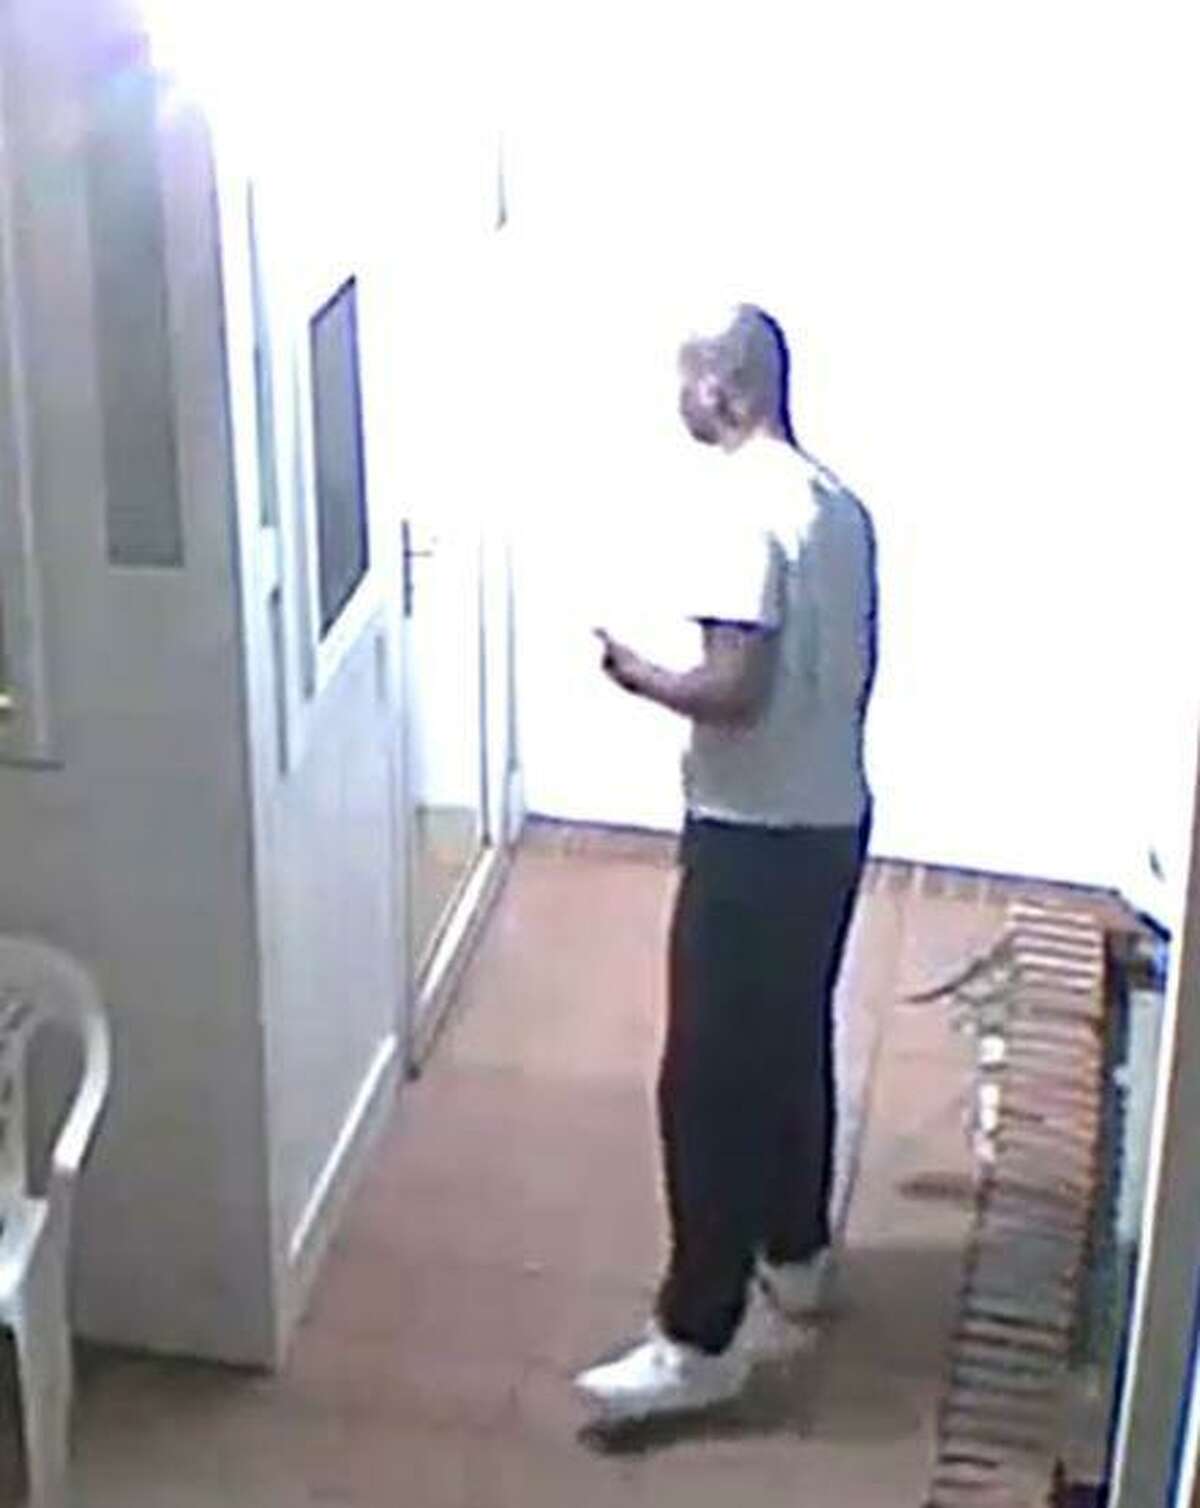 Police released video surveillance stills of this person of interest in the arson case Thursday.